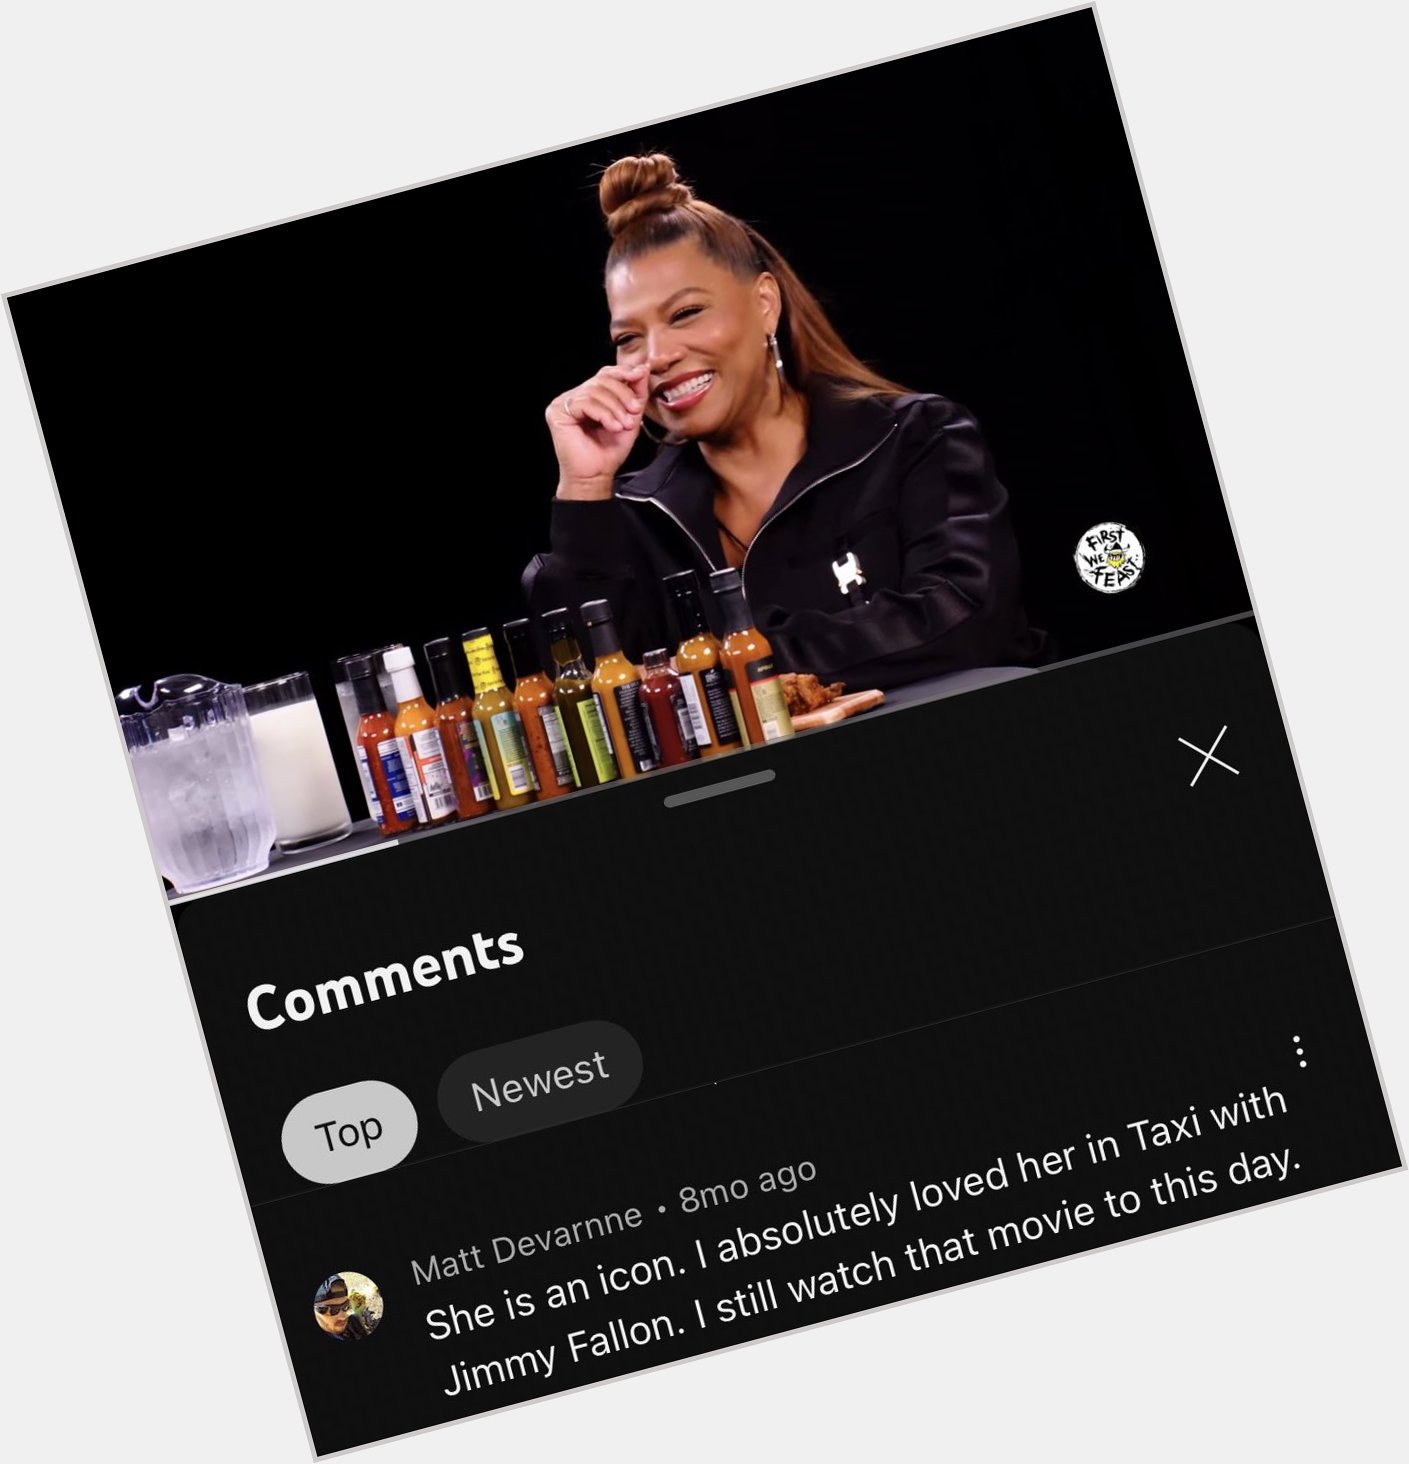 Happy birthday Queen Latifah  and throwback to the most disrespectful comment I ever read in my life 